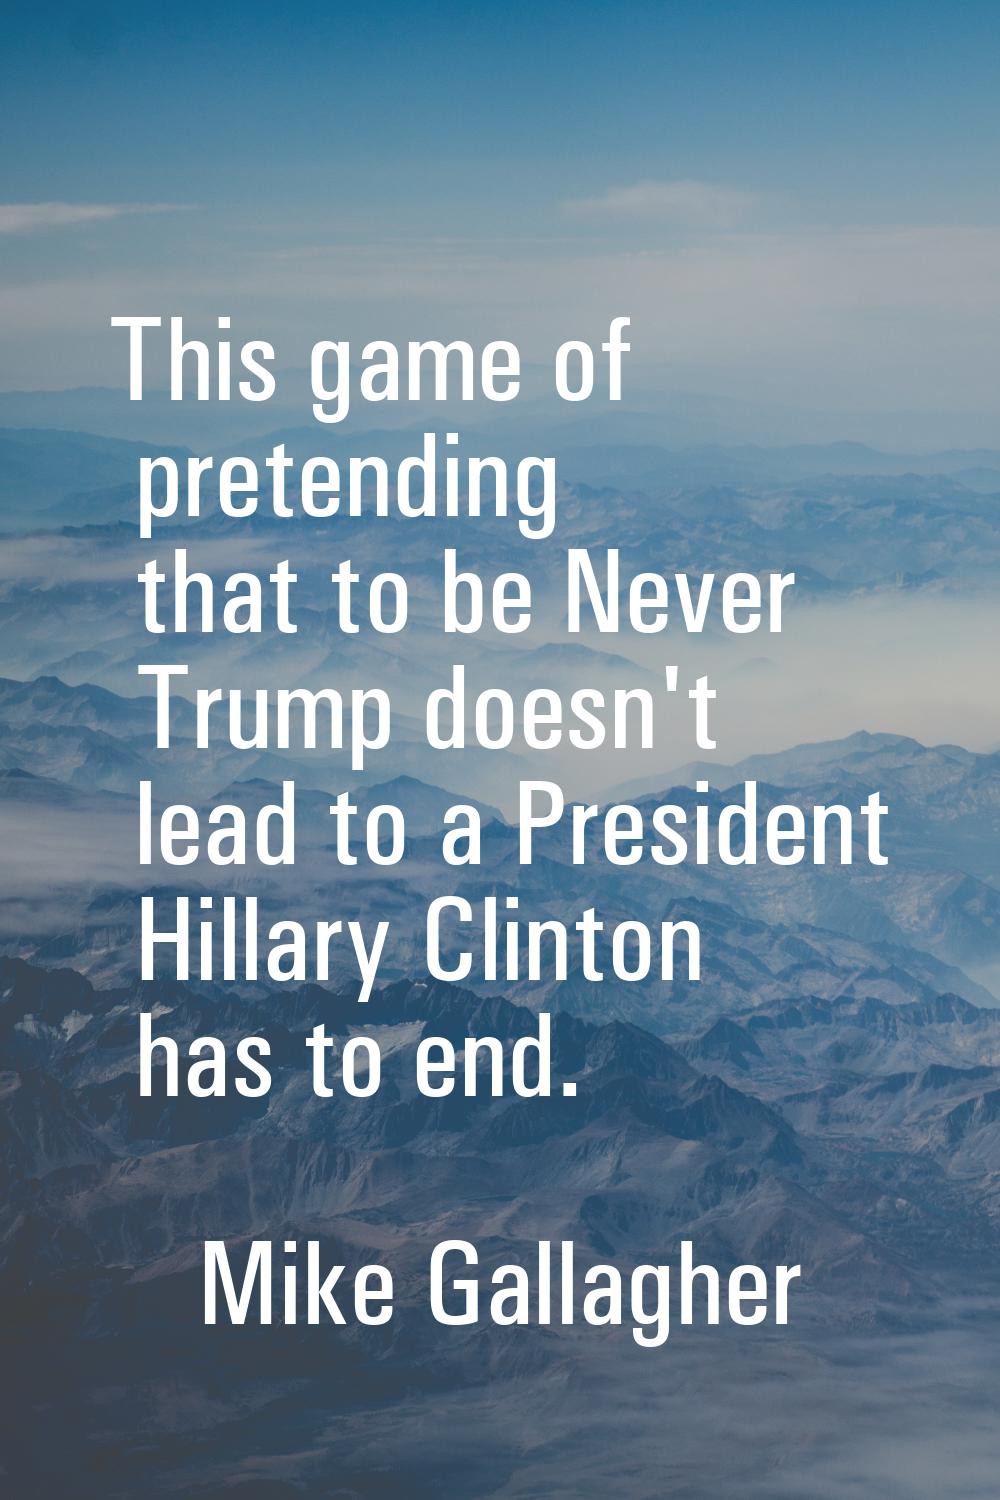 This game of pretending that to be Never Trump doesn't lead to a President Hillary Clinton has to e